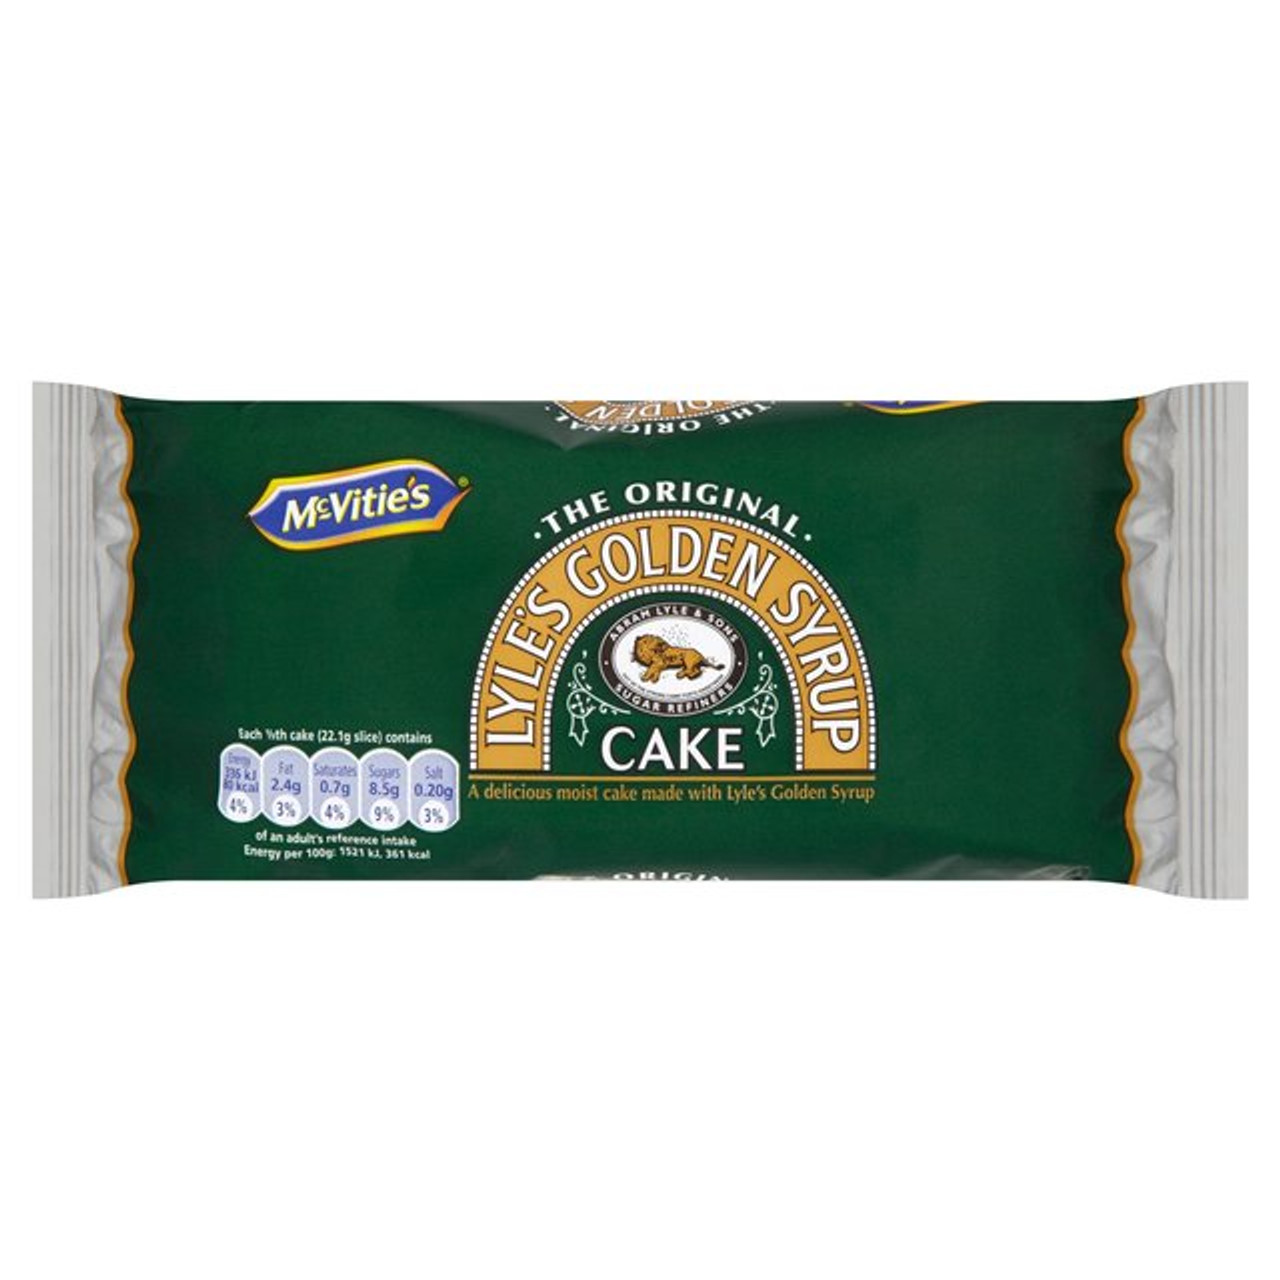 McVities Original Lyles Golden Syrup Cake (July - Aug 23) RRP £1.25 CLEARANCE XL 89p or 2 for £1.50